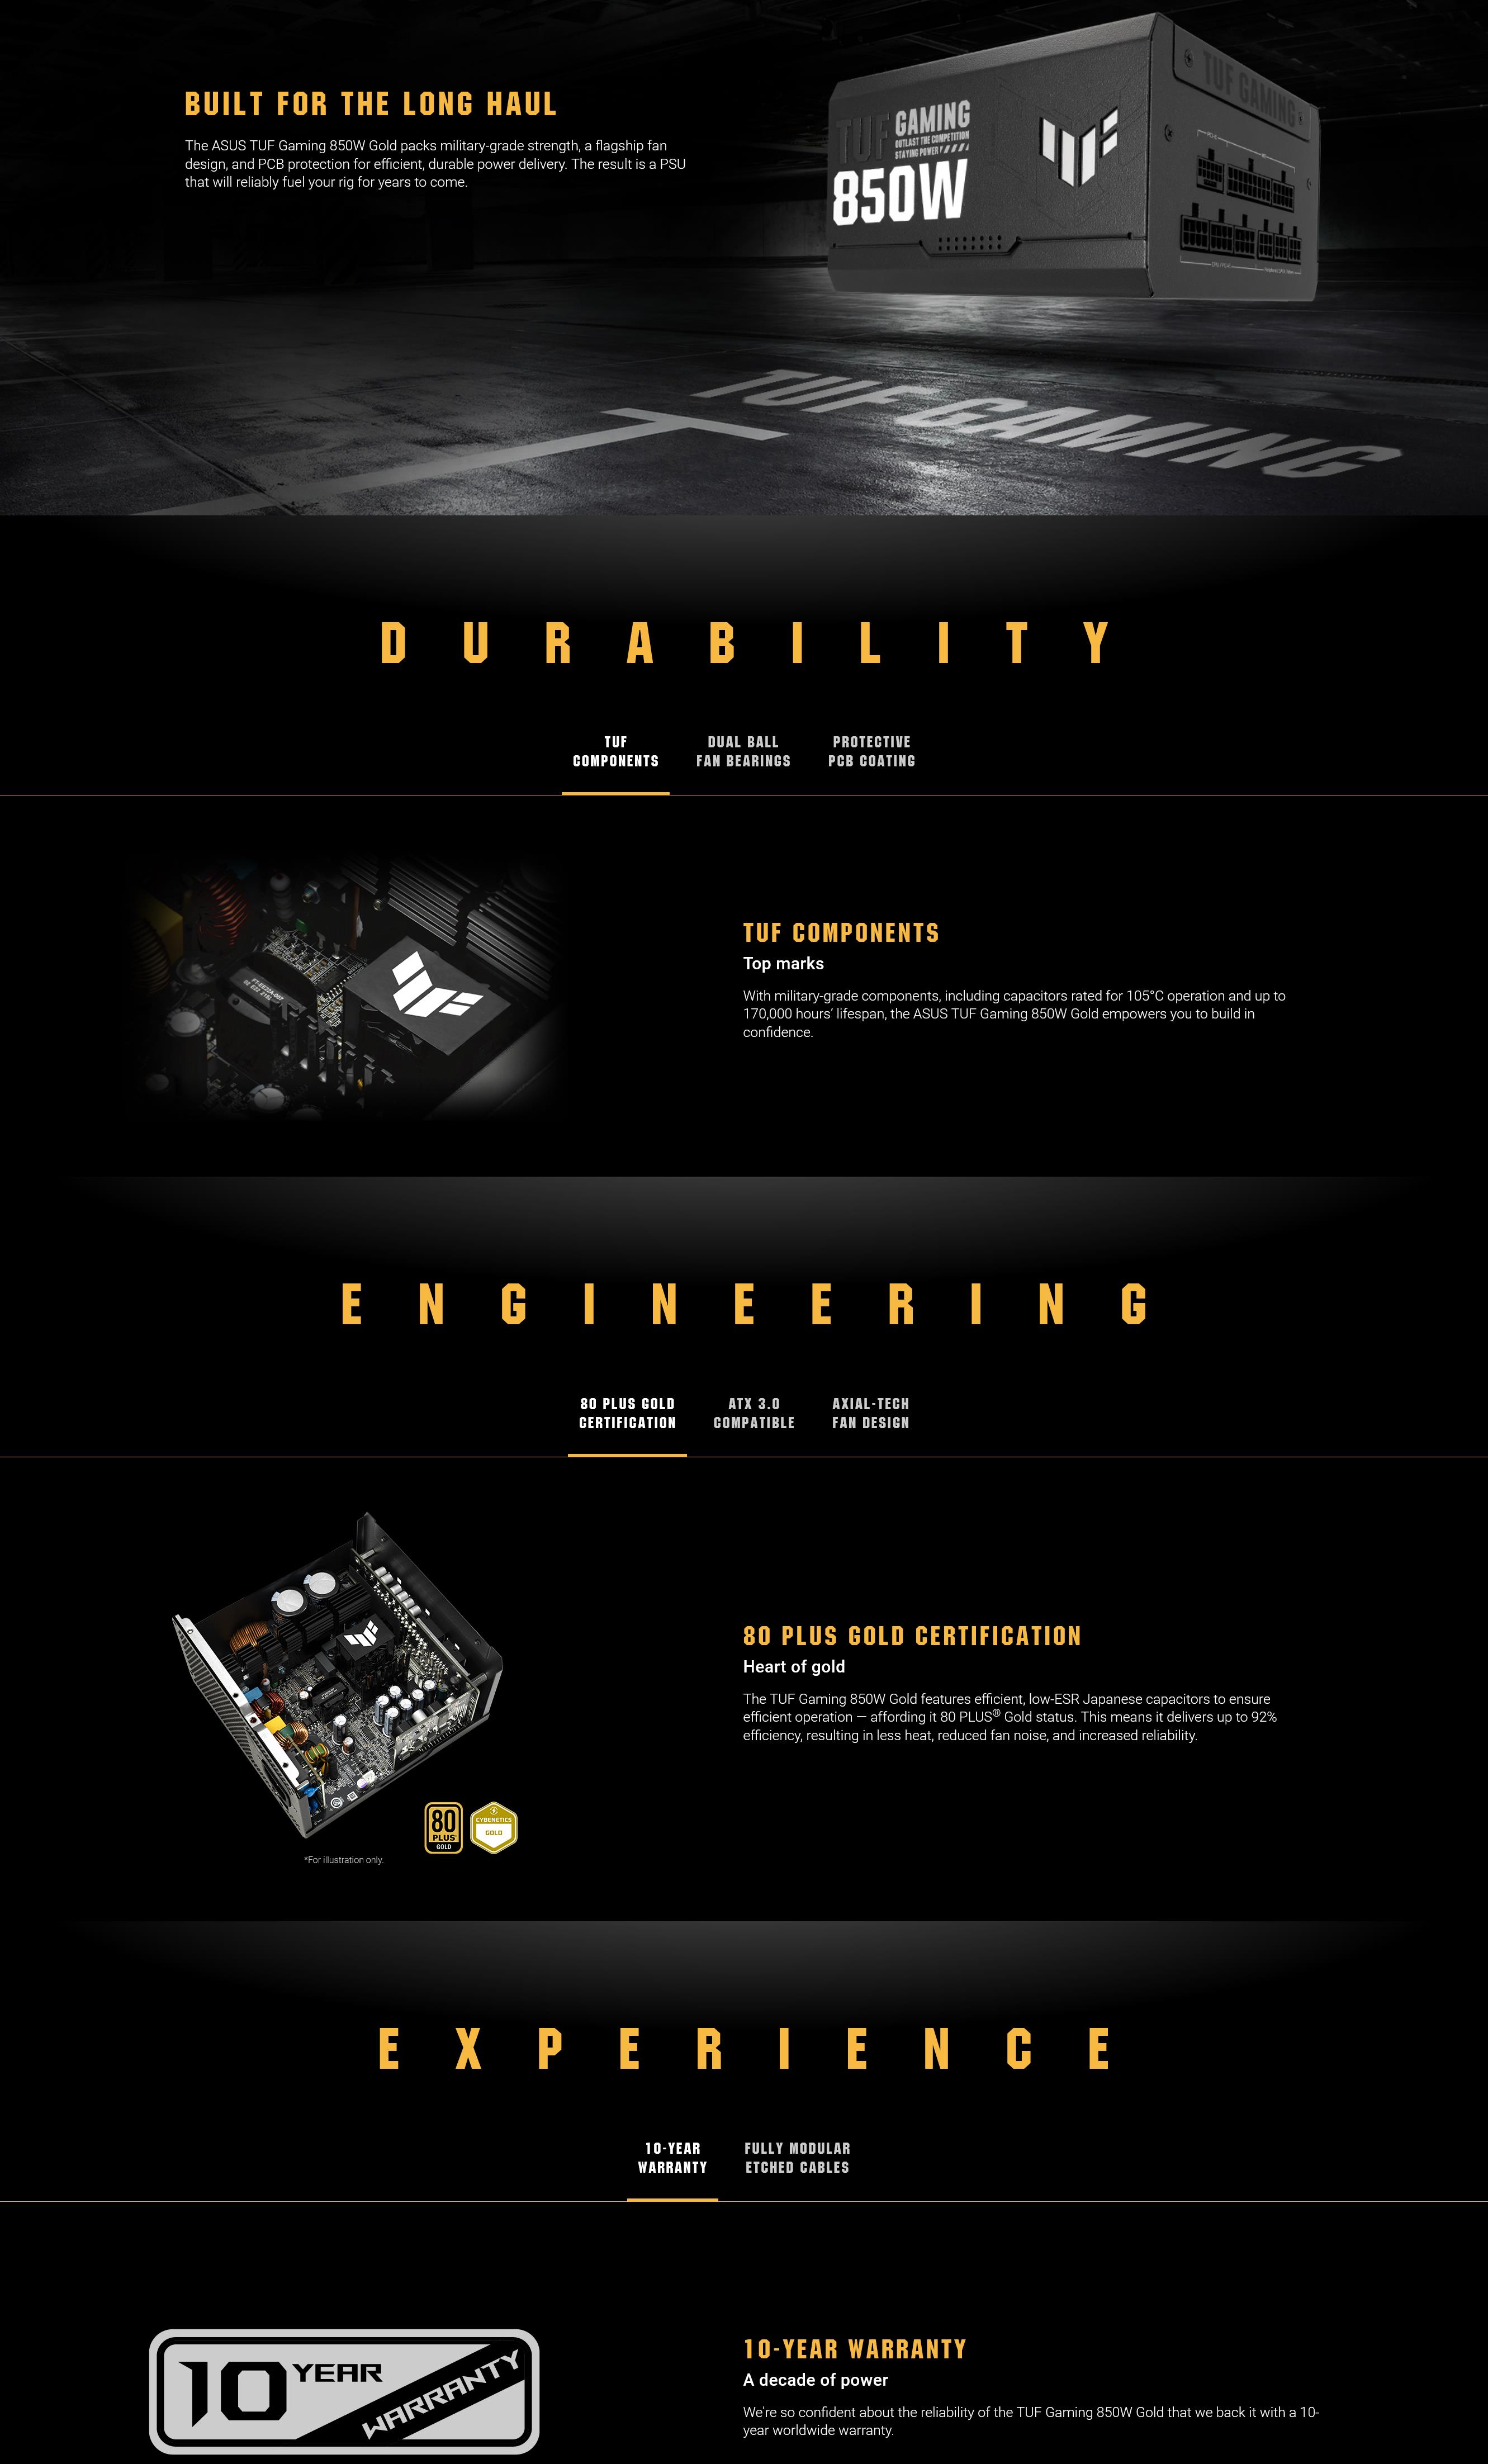 A large marketing image providing additional information about the product ASUS TUF Gaming 850W Gold ATX Modular PSU - Additional alt info not provided